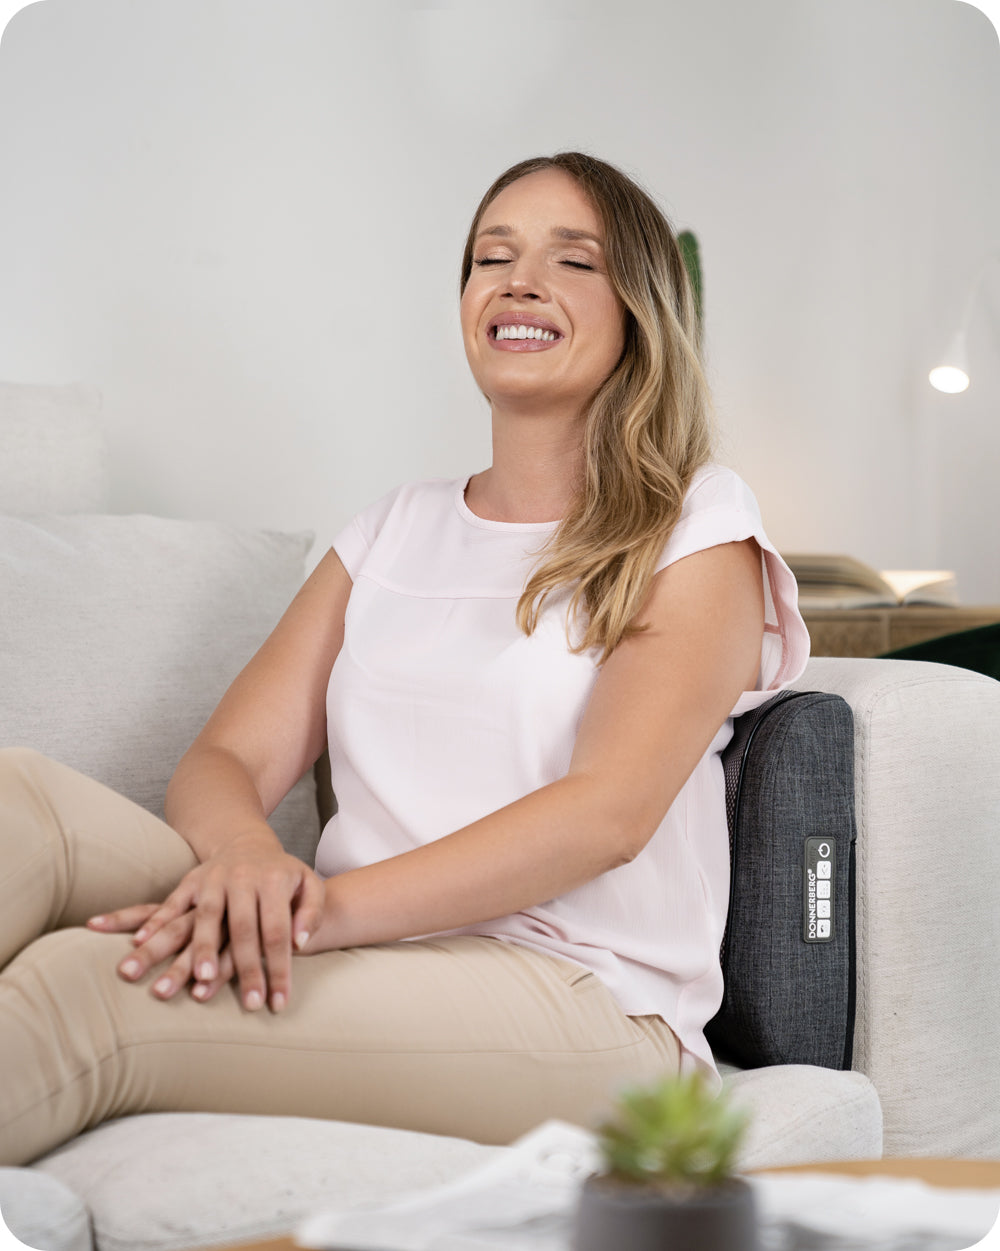 woman enjoying massage with back massager placed behind her back